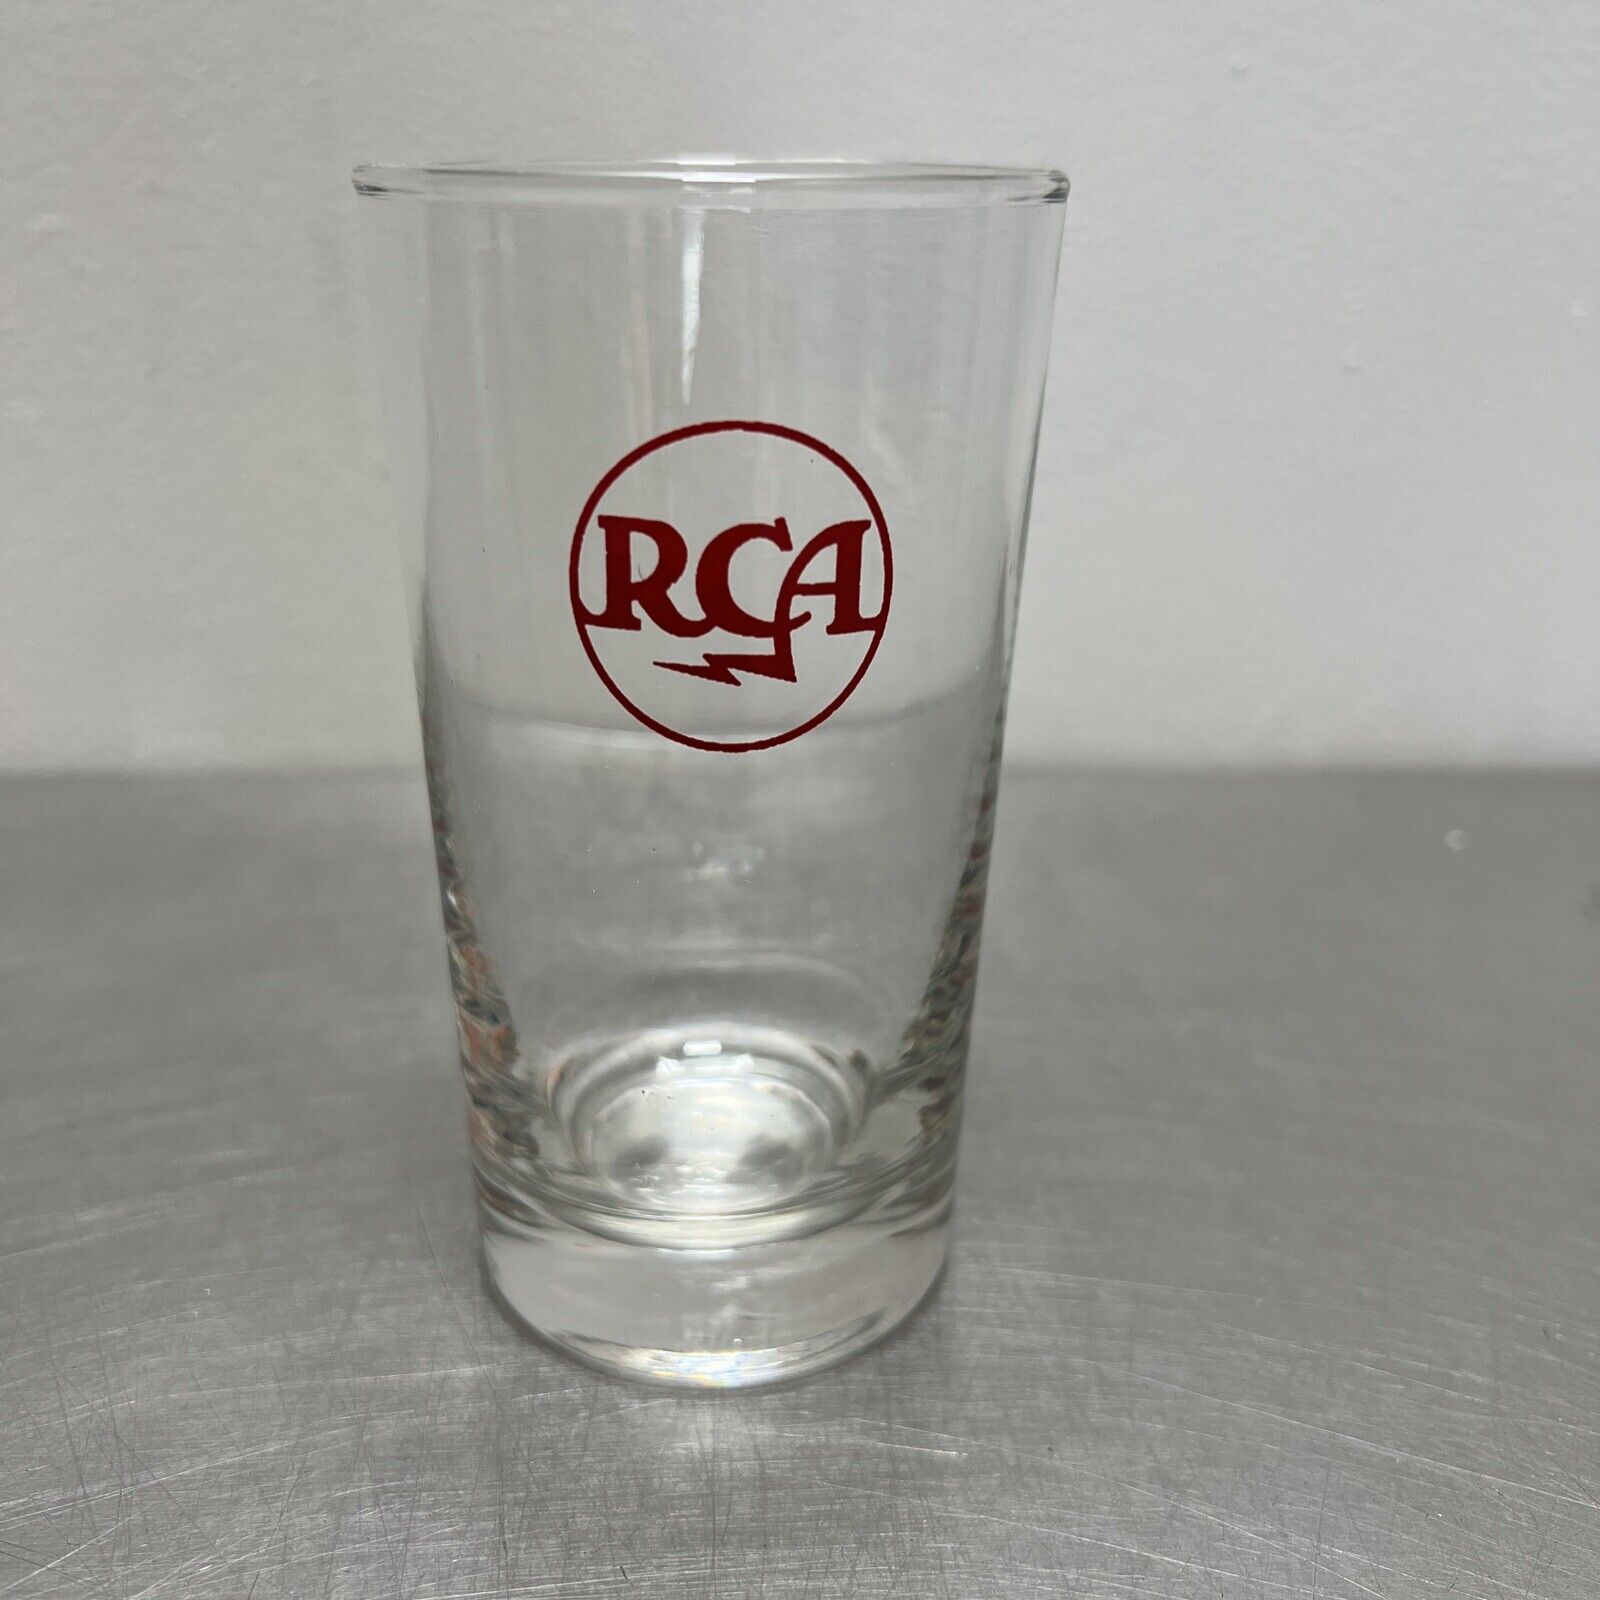 Vintage RCA Drinking Glass 